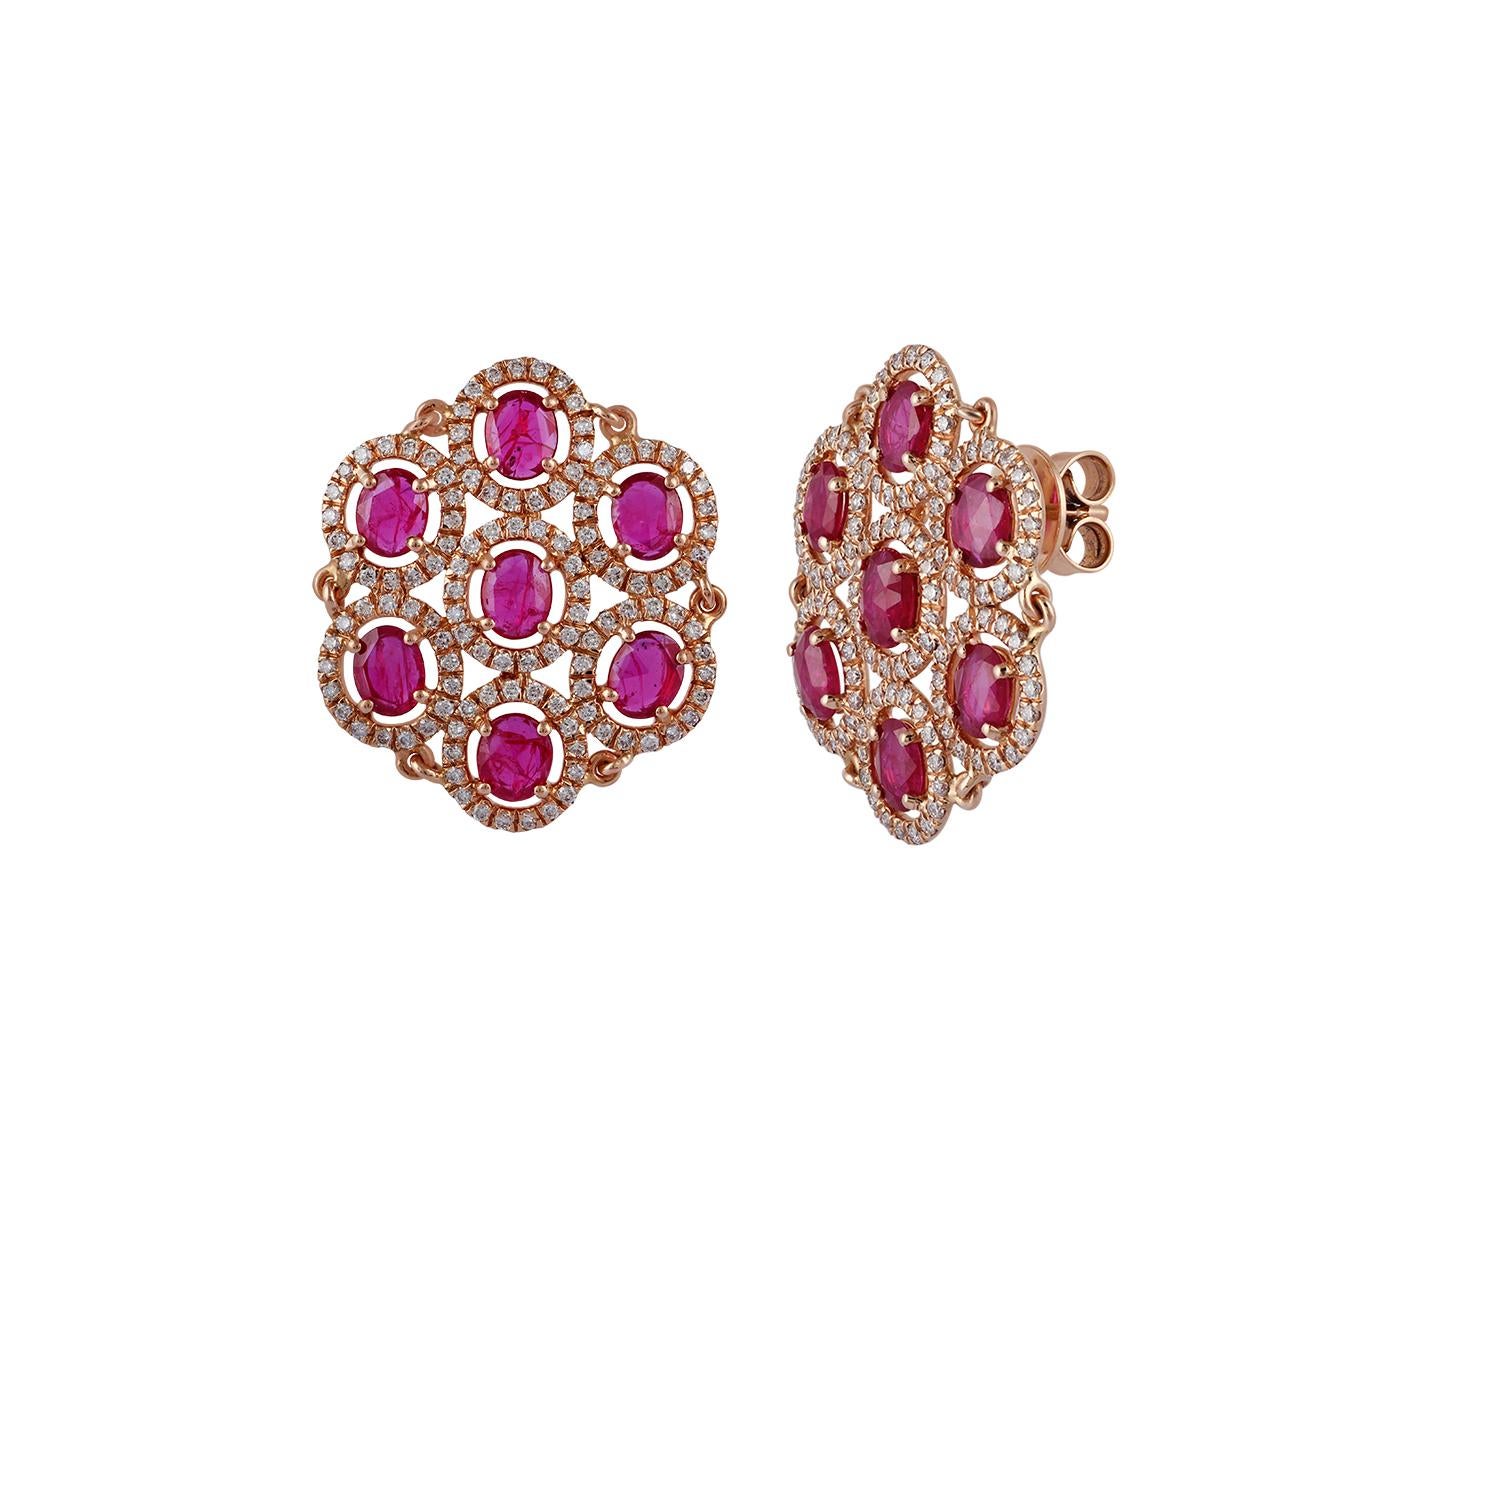 An exclusive pair of earrings with 14 rose-cut rubies (3.85 carats), 238 round brilliant cut diamond (1.17 carats) studded in 18K rose gold (7.37 grams) with a simple pull-push mechanism. This is an elegant & wearable earring.